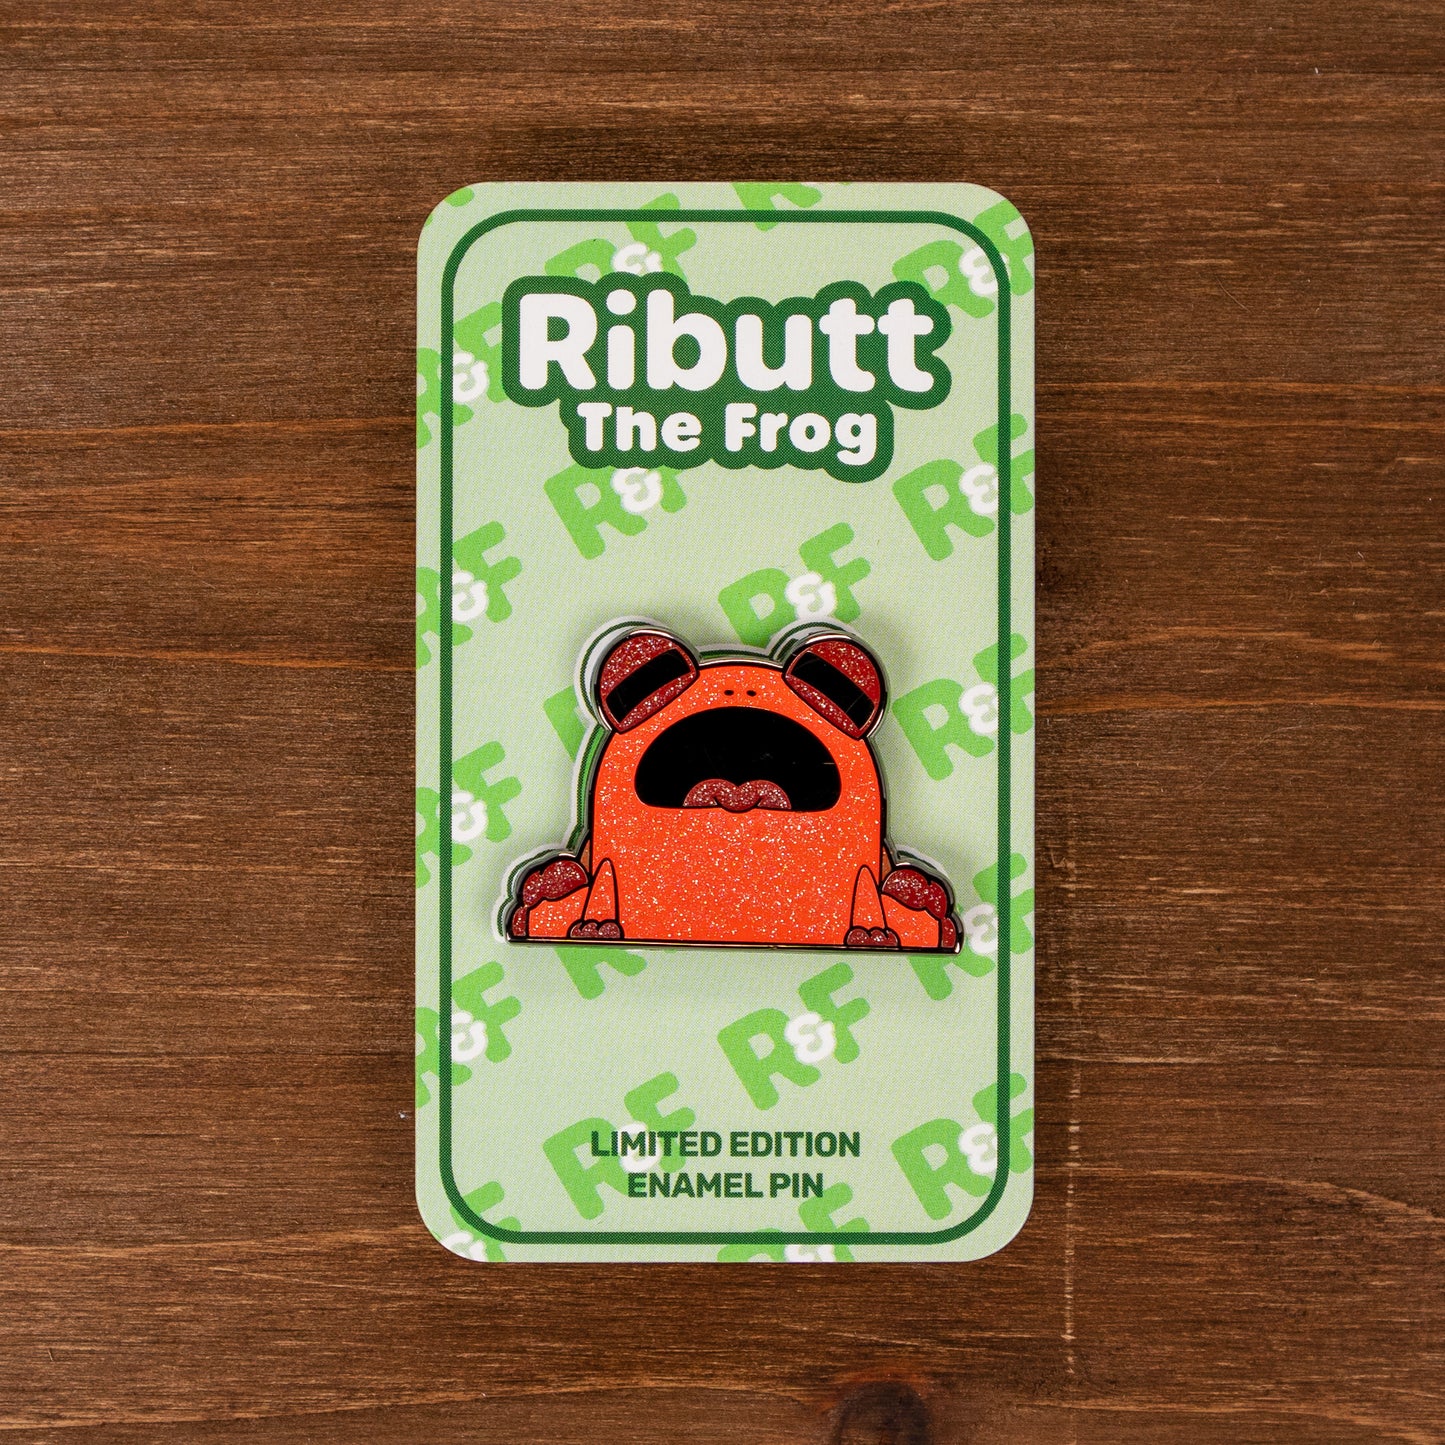 Ributt the Frog Ruby Limited Edition Enamel Pin